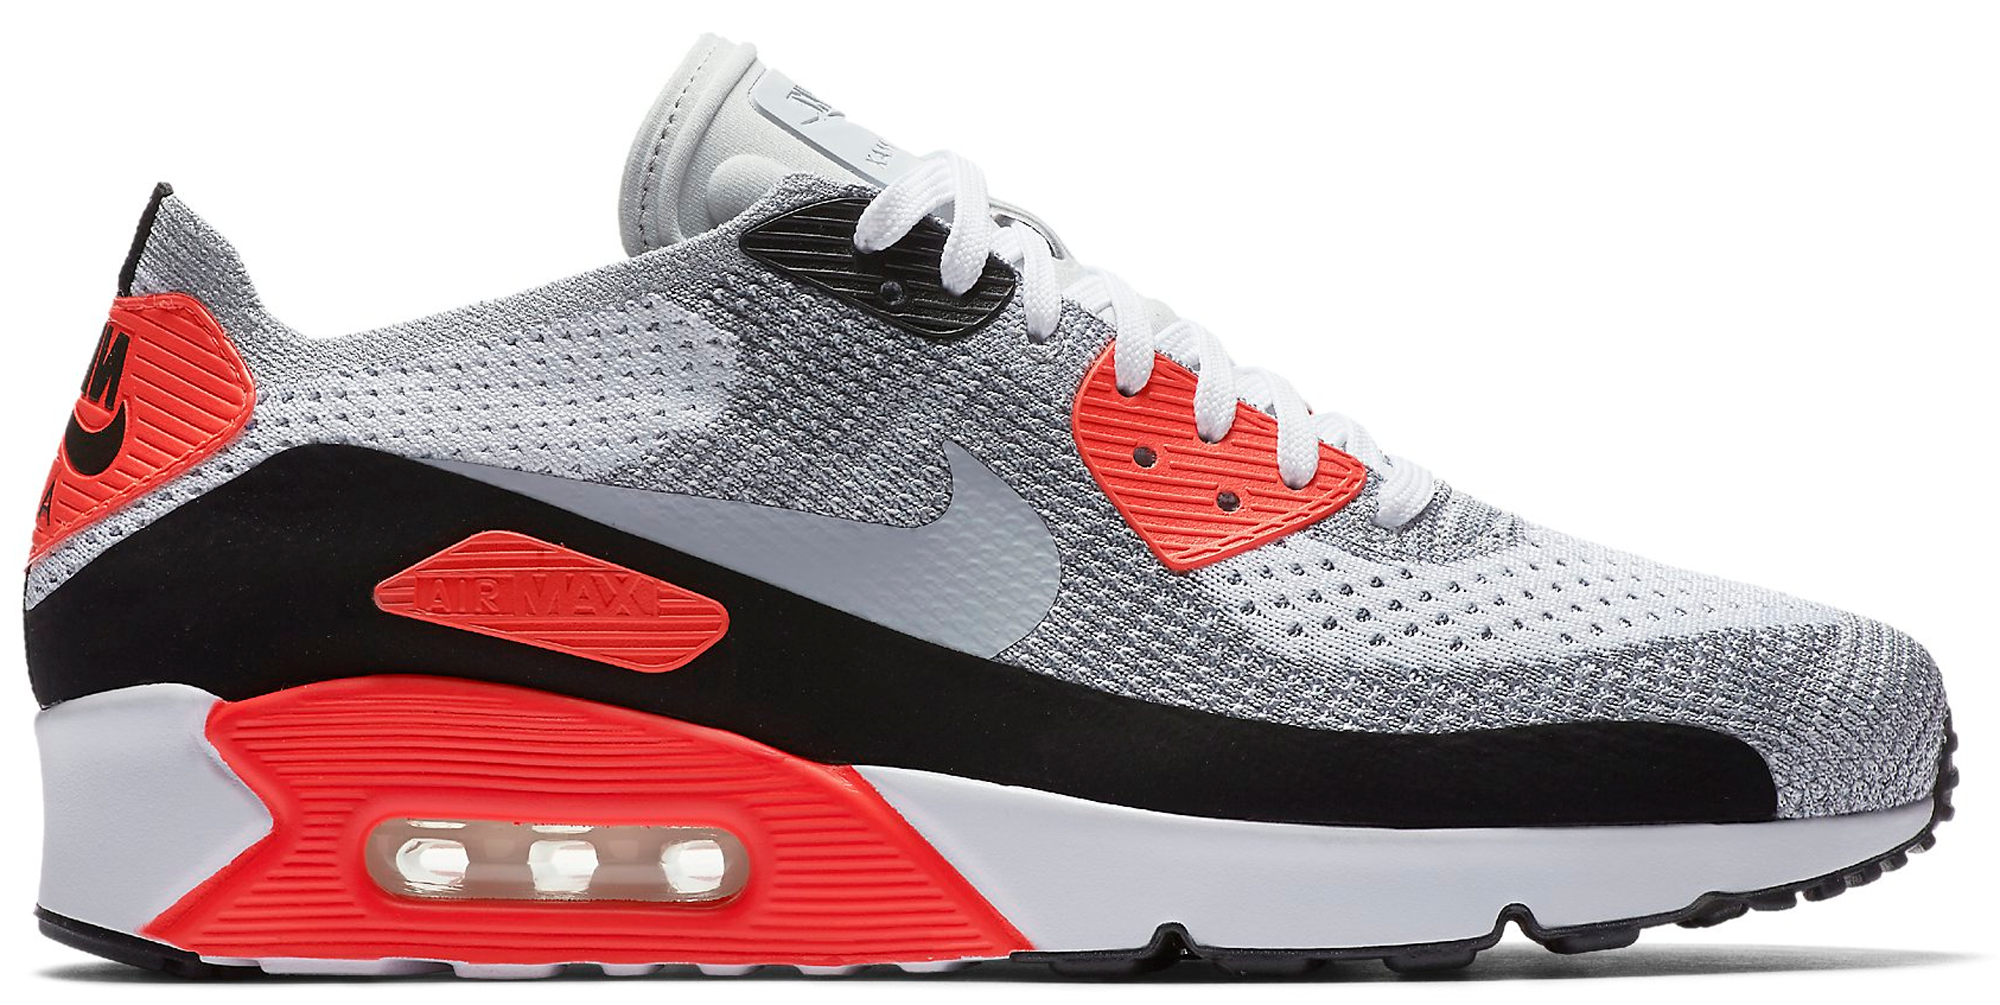 Nike Max 90 Ultra 2.0 Flyknit Infrared - News